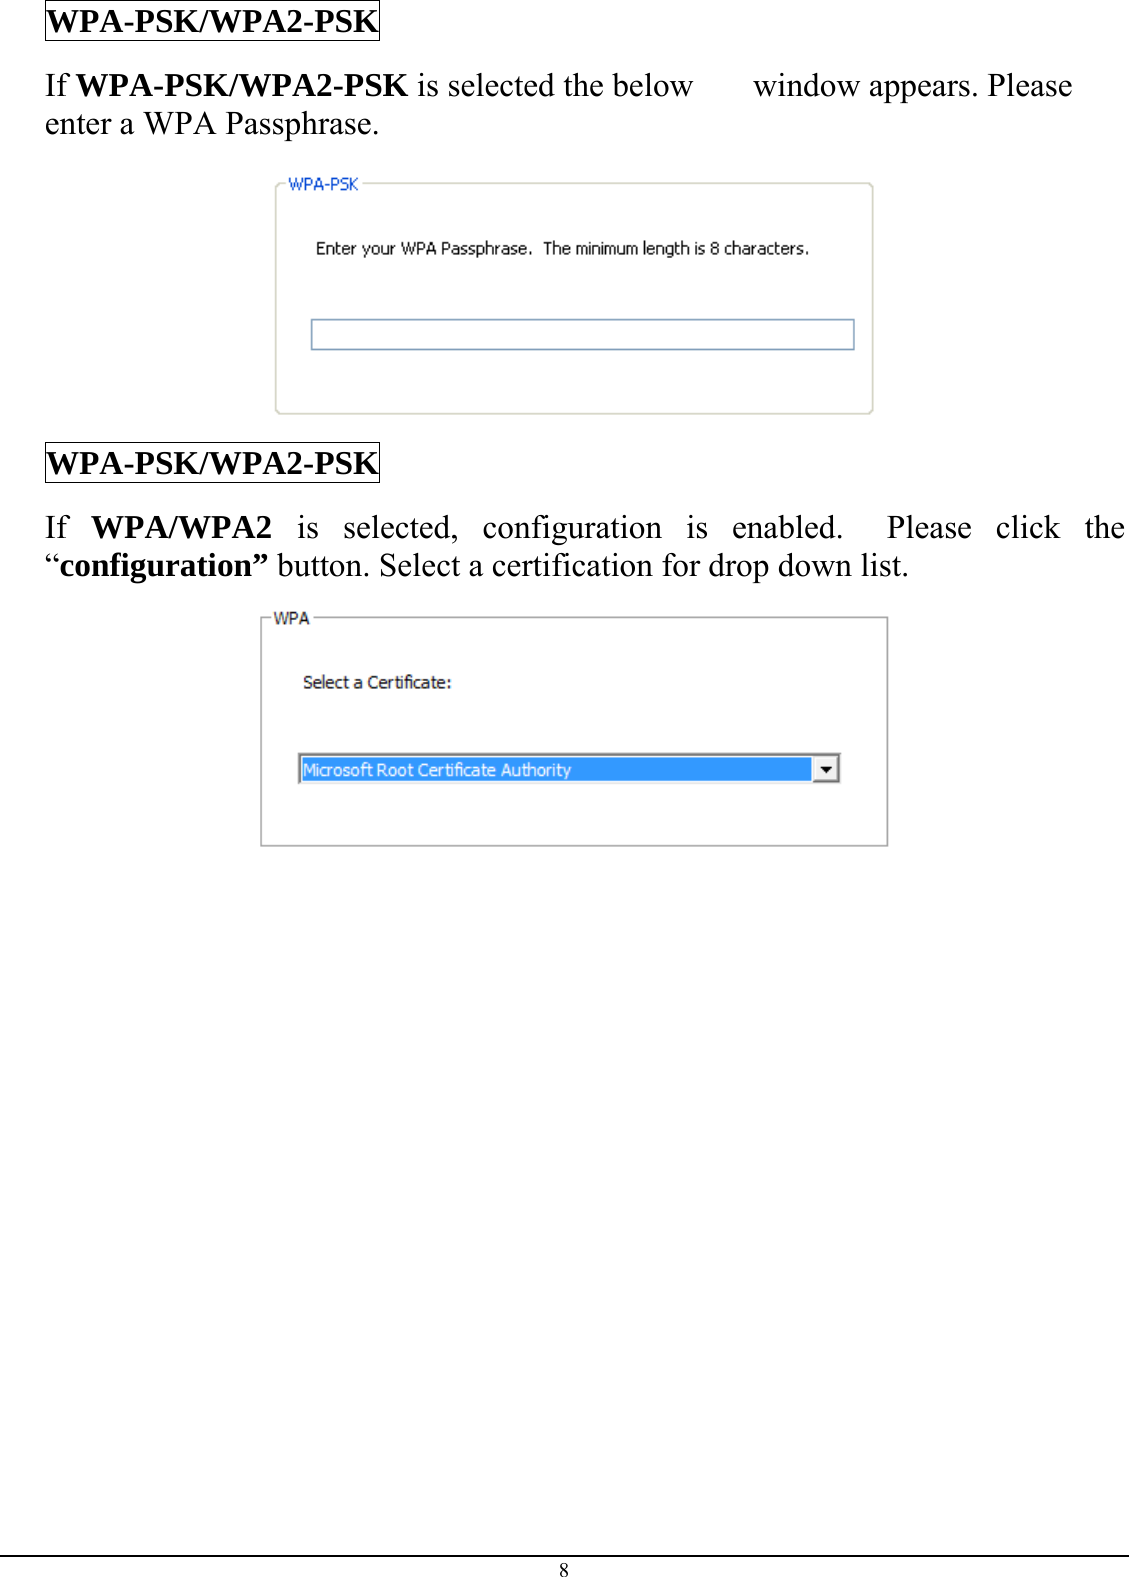 8 WPA-PSK/WPA2-PSK If WPA-PSK/WPA2-PSK is selected the below   window appears. Please enter a WPA Passphrase.  WPA-PSK/WPA2-PSK If  WPA/WPA2  is selected, configuration is enabled.  Please click the “configuration” button. Select a certification for drop down list.  